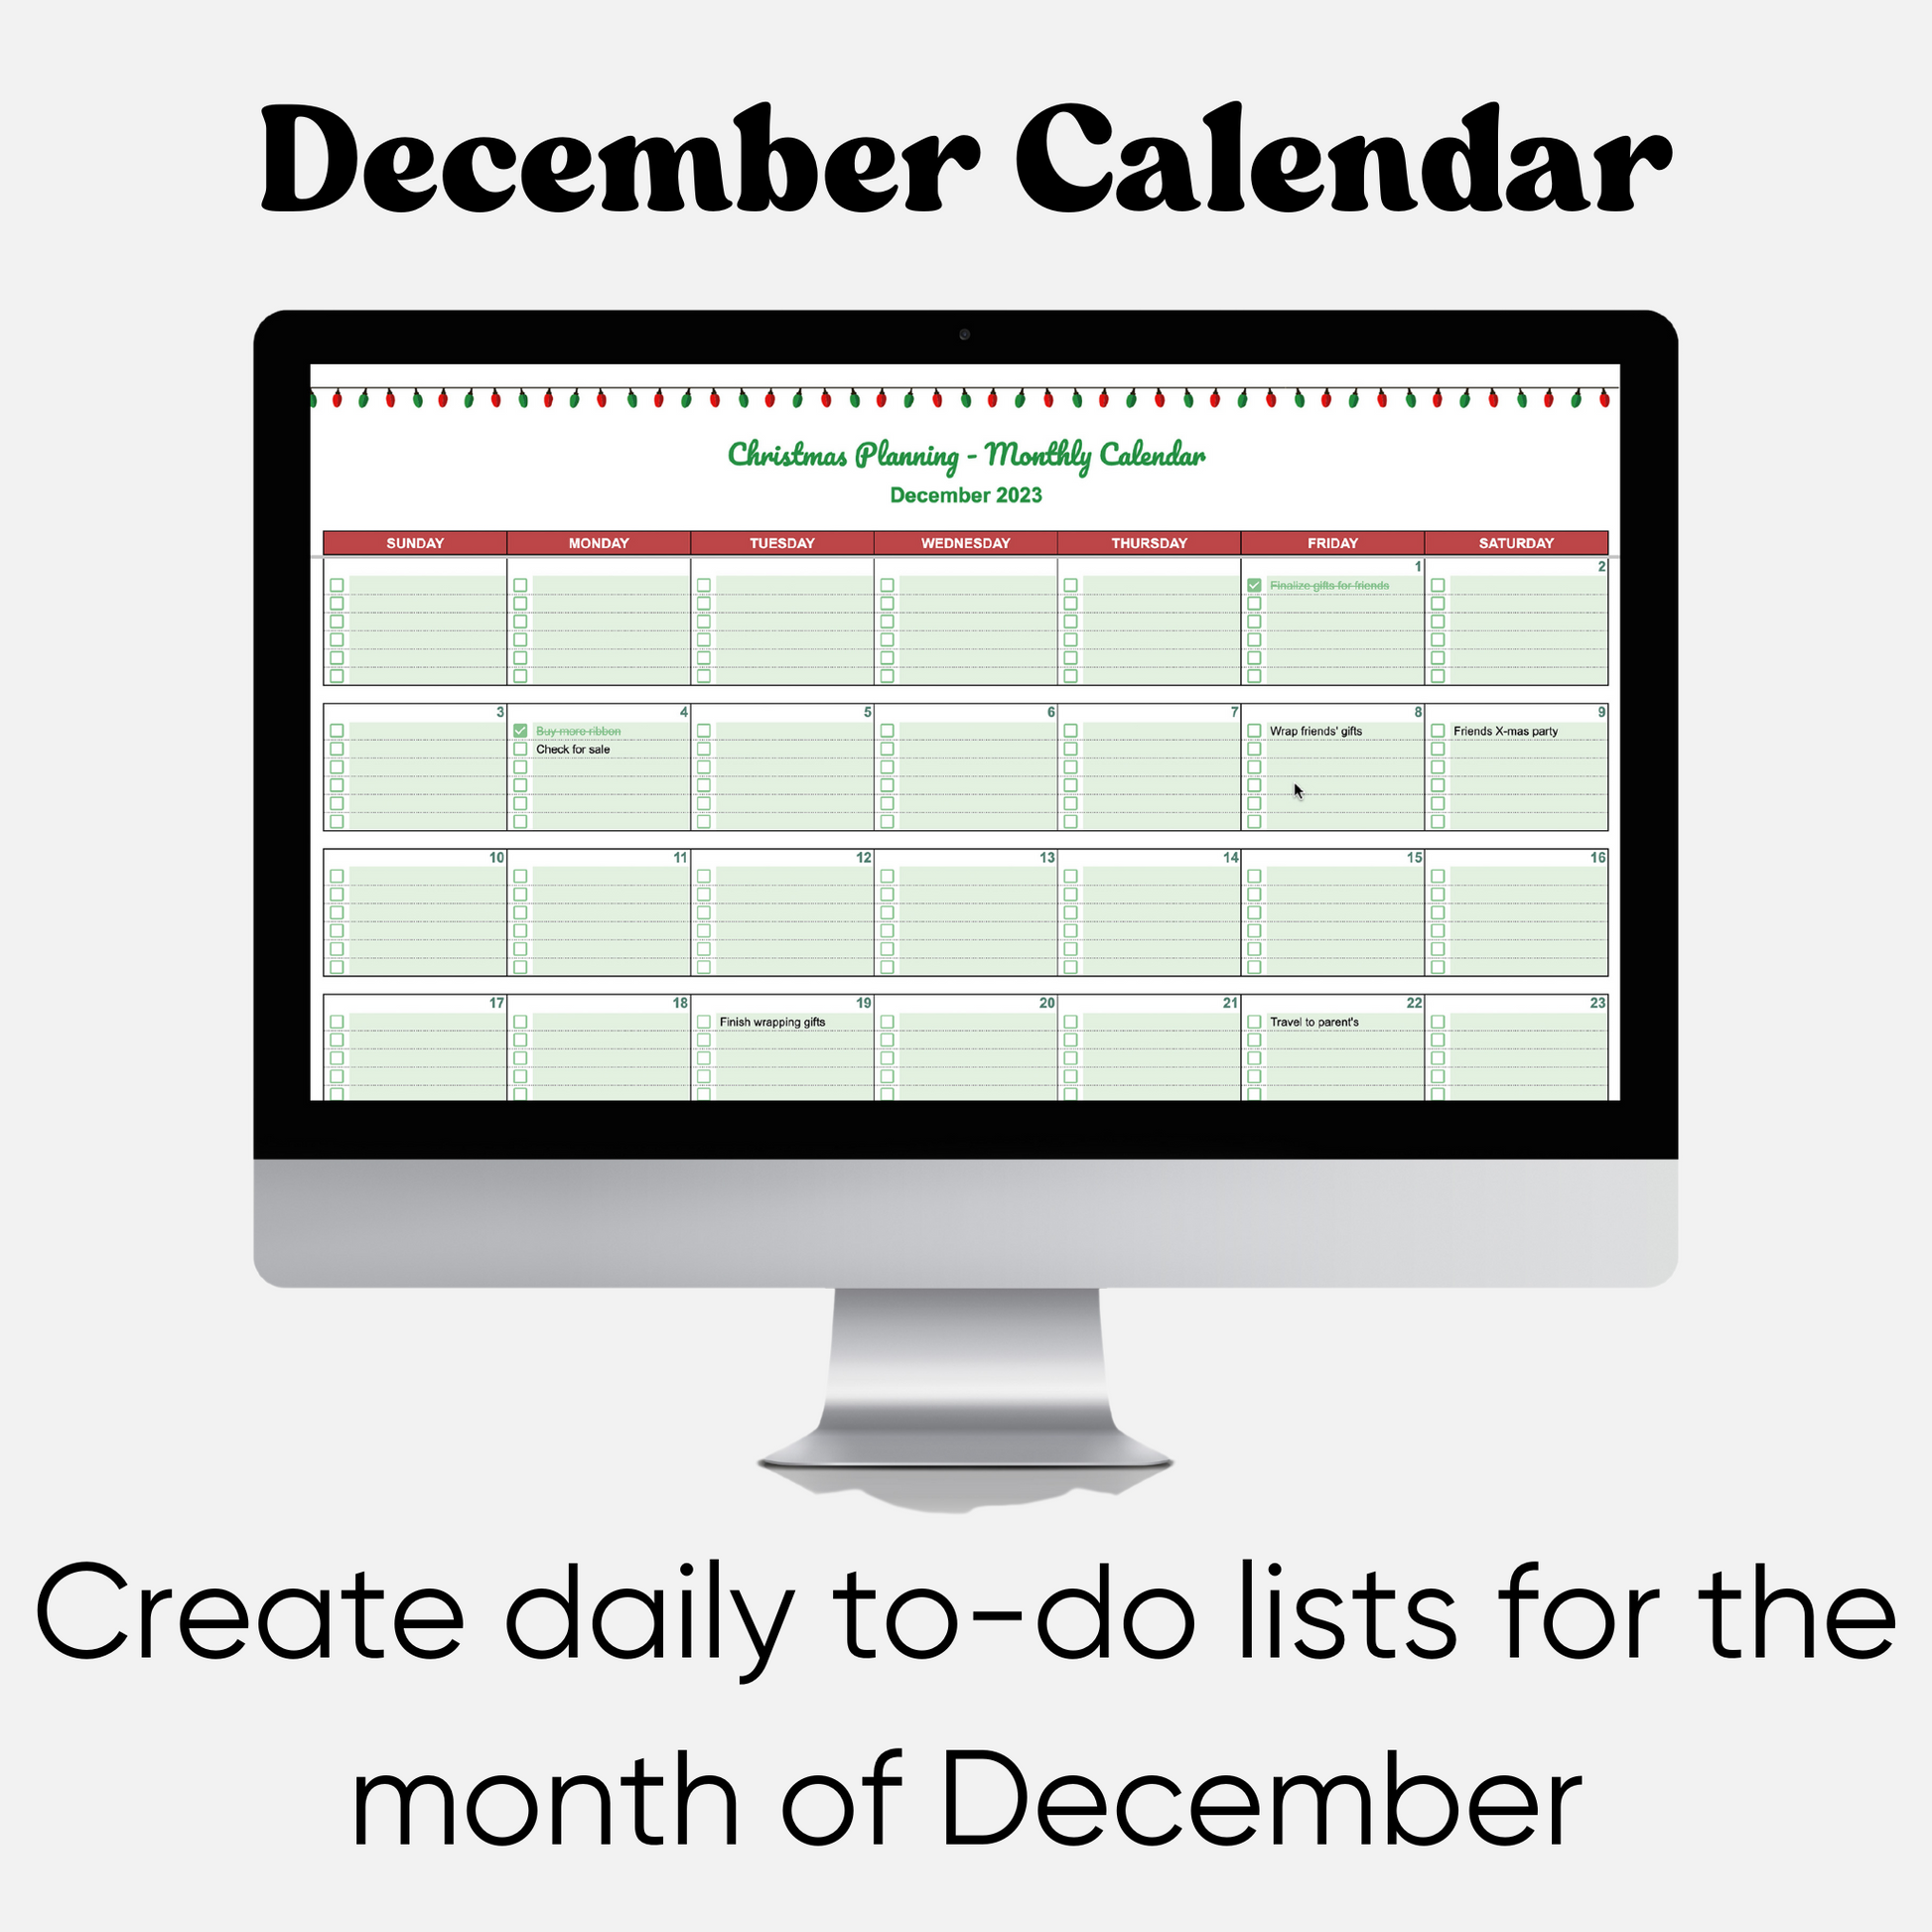 Snapshot of the Christmas Planner template's calendar section, providing a visual overview of holiday events and plans. The spreadsheet template assists in scheduling and coordinating festive activities